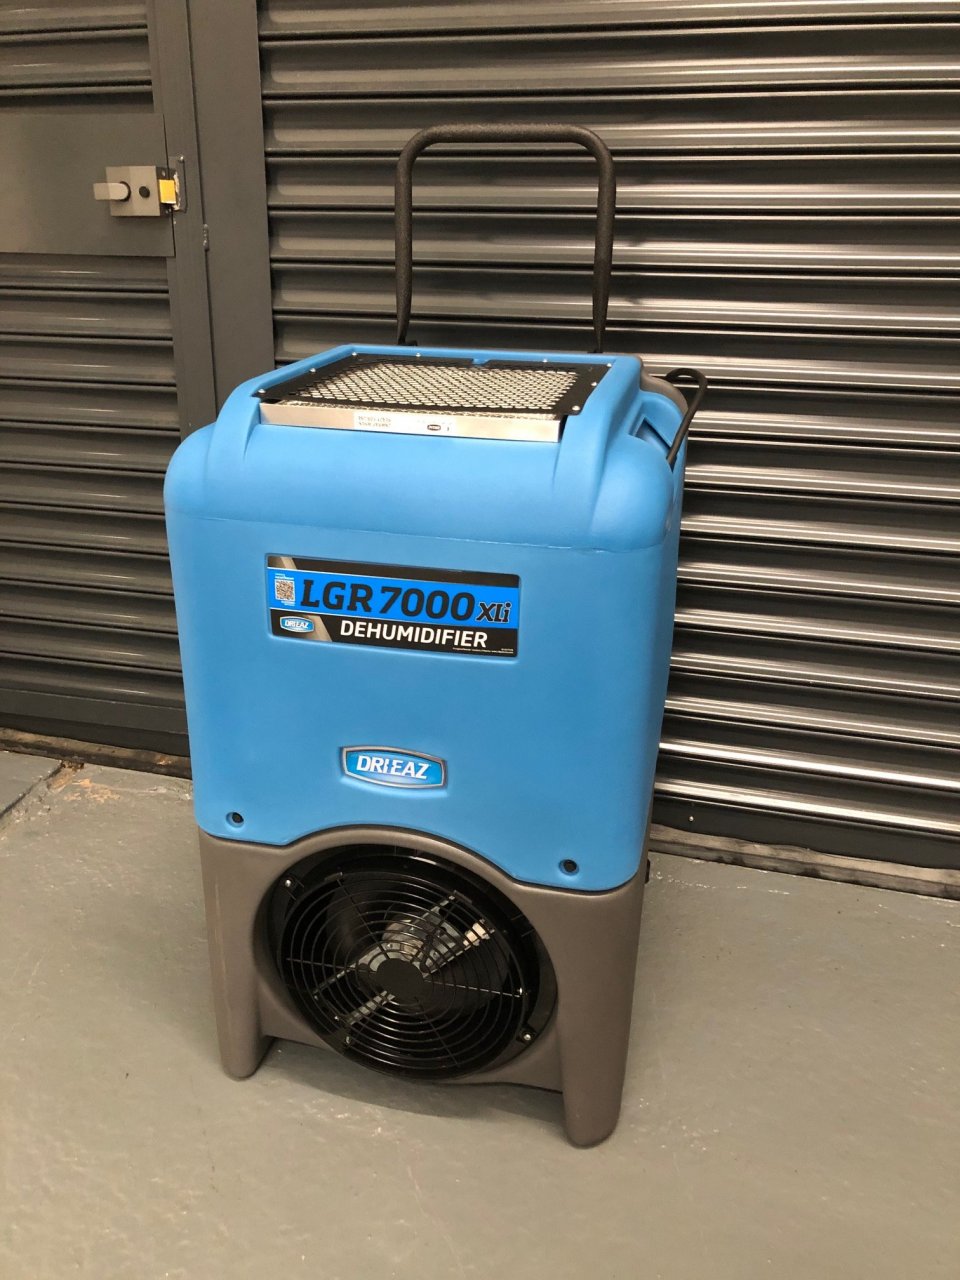 Emergency Dehumidifier Hire Services